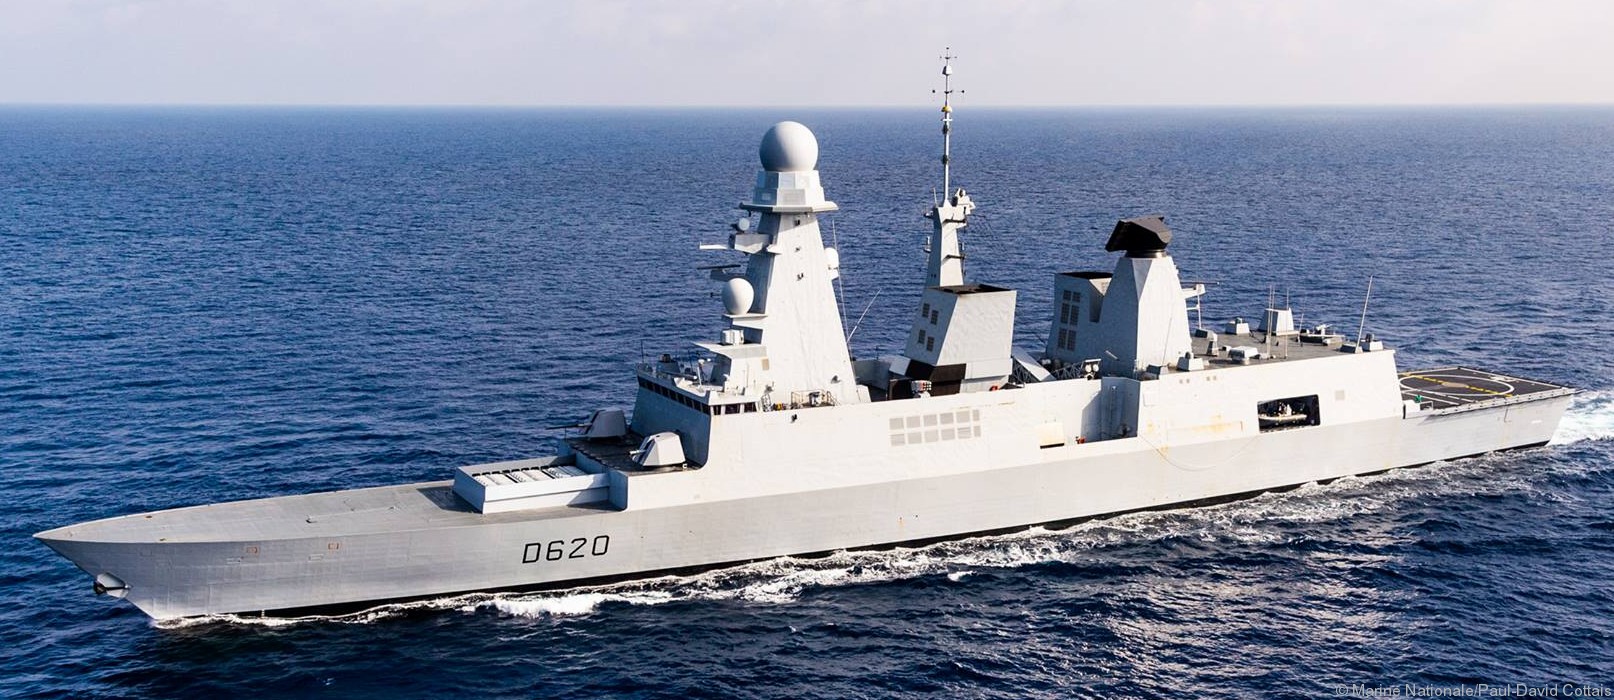 d-620 fs forbin horizon class guided missile frigate fregate anti-air-warfare aaw french navy marine nationale 08